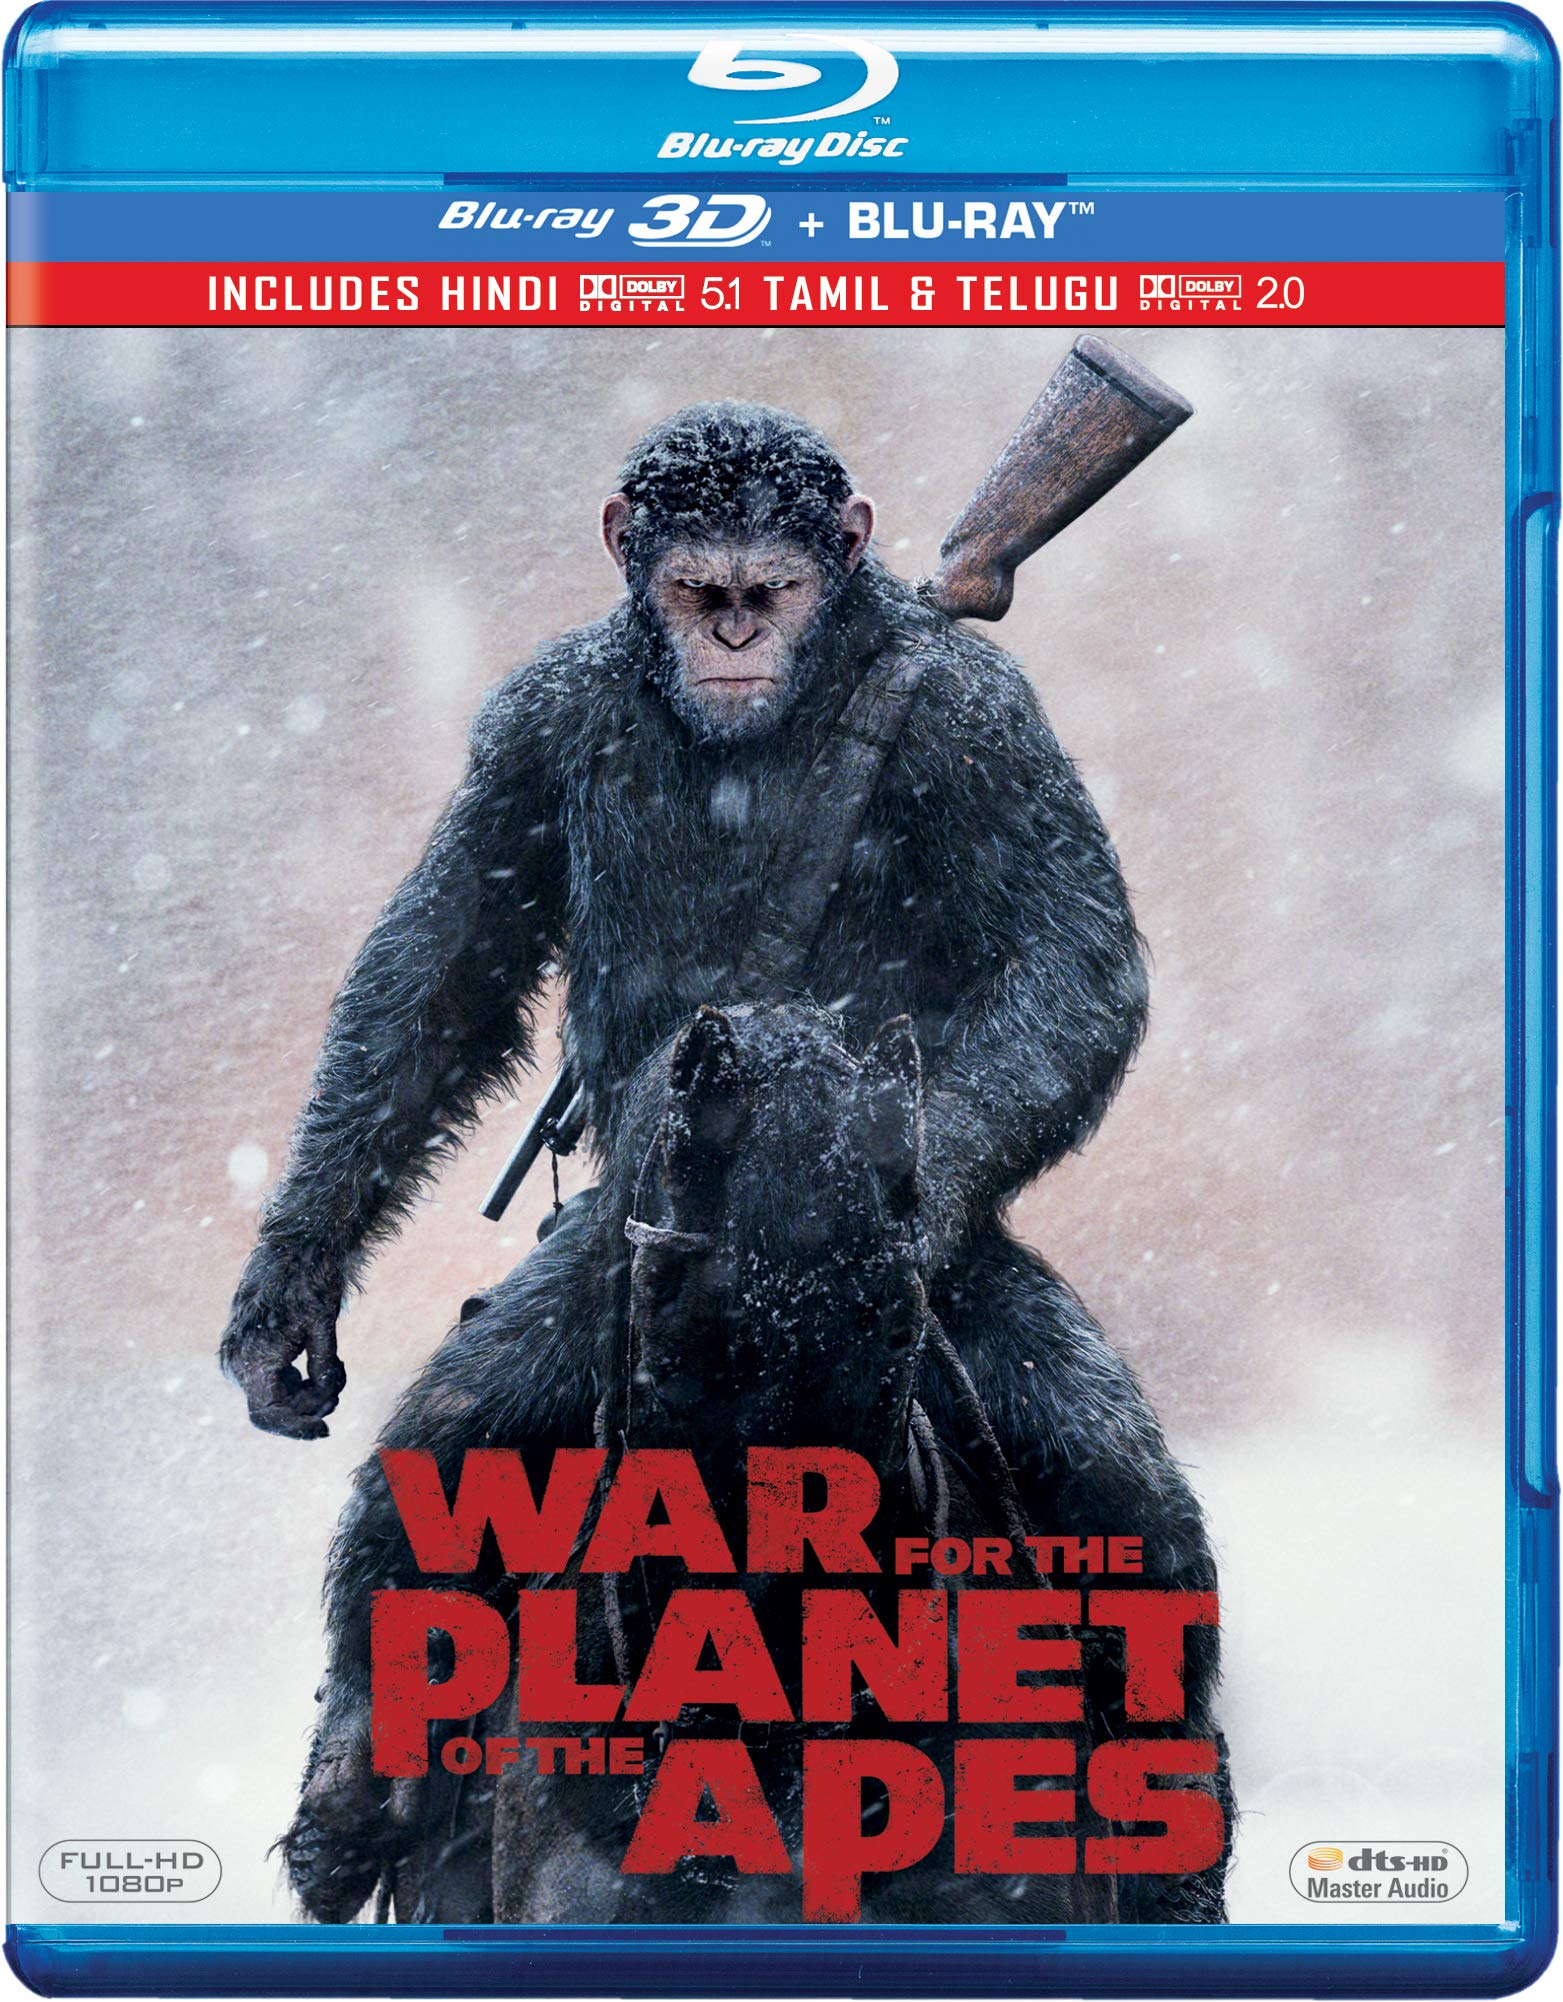 war-for-the-planet-of-the-apes-blu-ray-3d-blu-ray-2-disc-movie-p